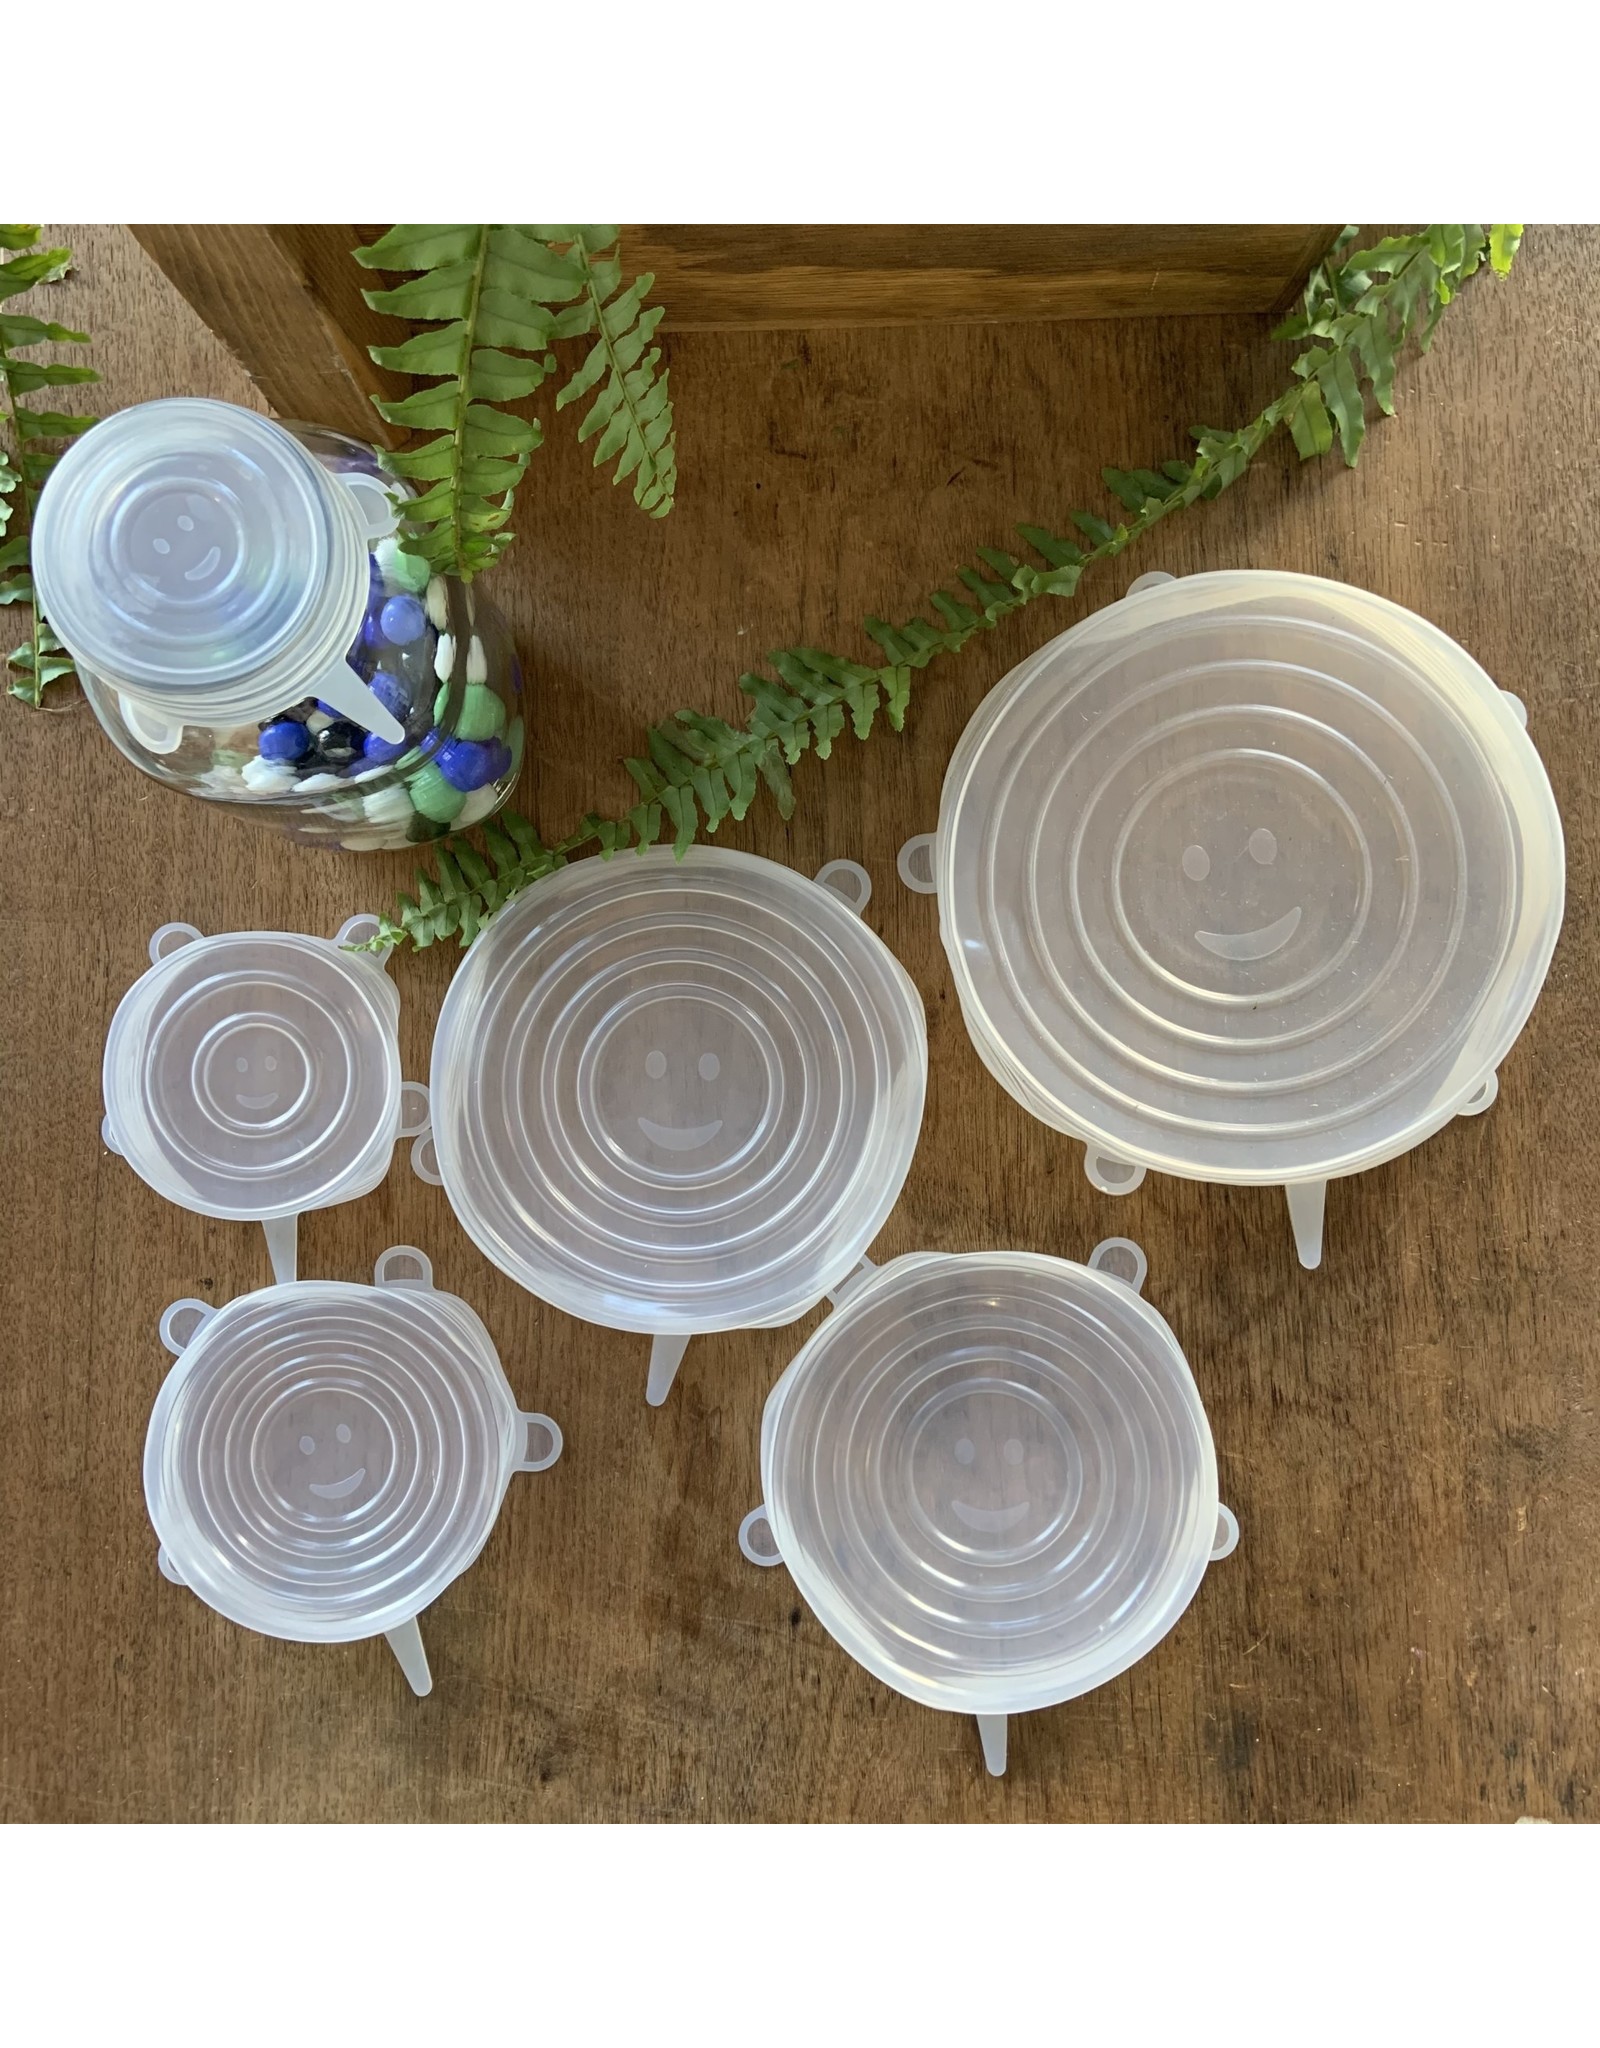 Silly Lids Reusable Silicone Stretch Lids - 6-Pack